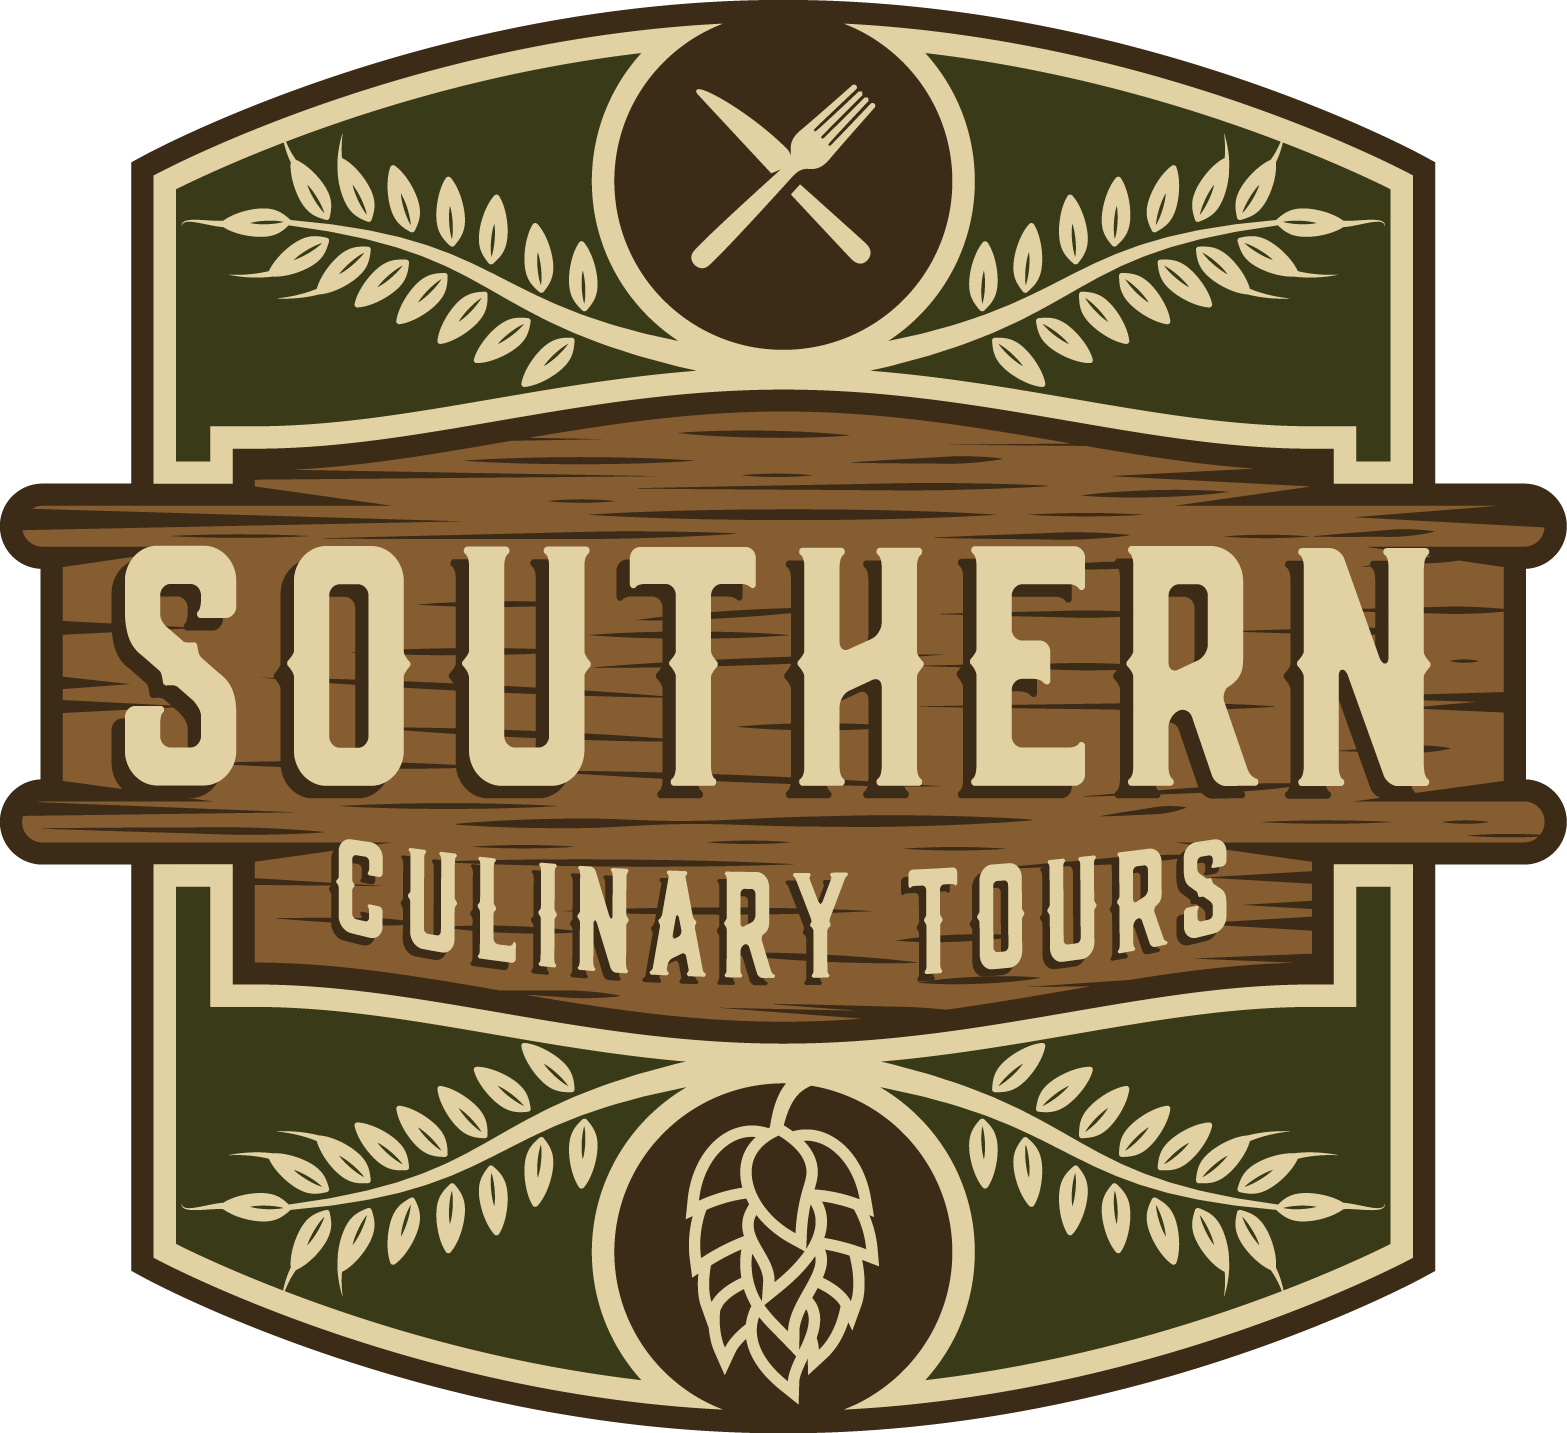 About Southern Culinary Tours